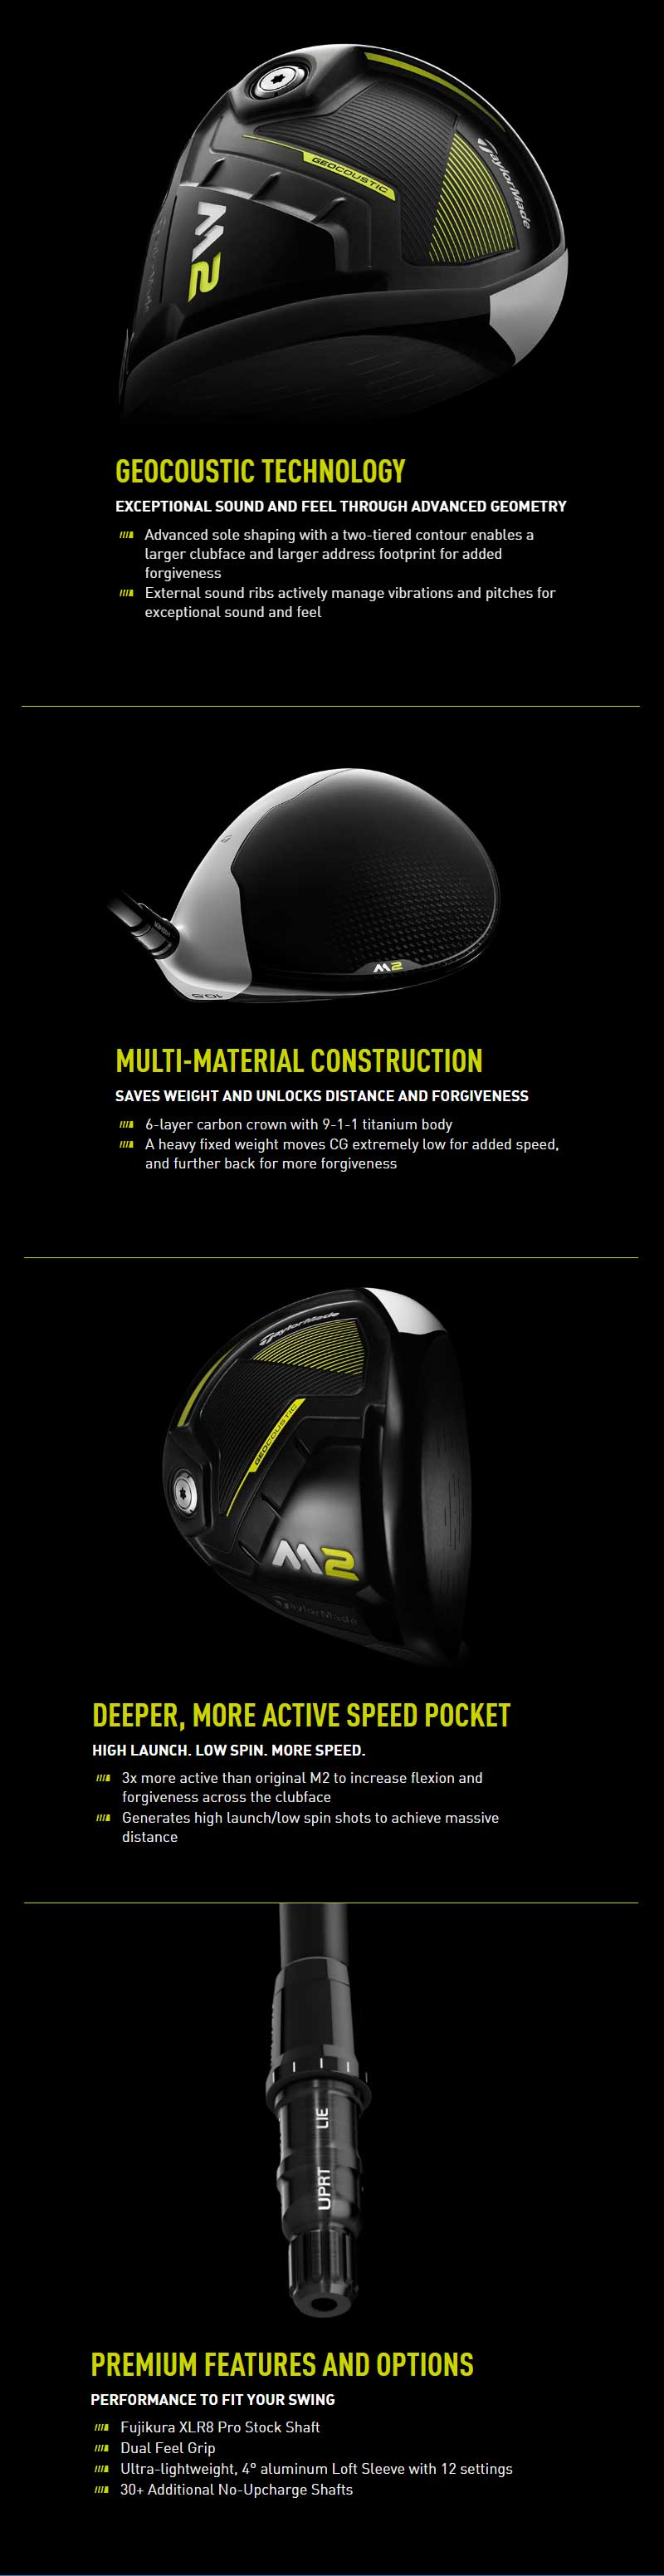 Taylormade New M2 Drivers